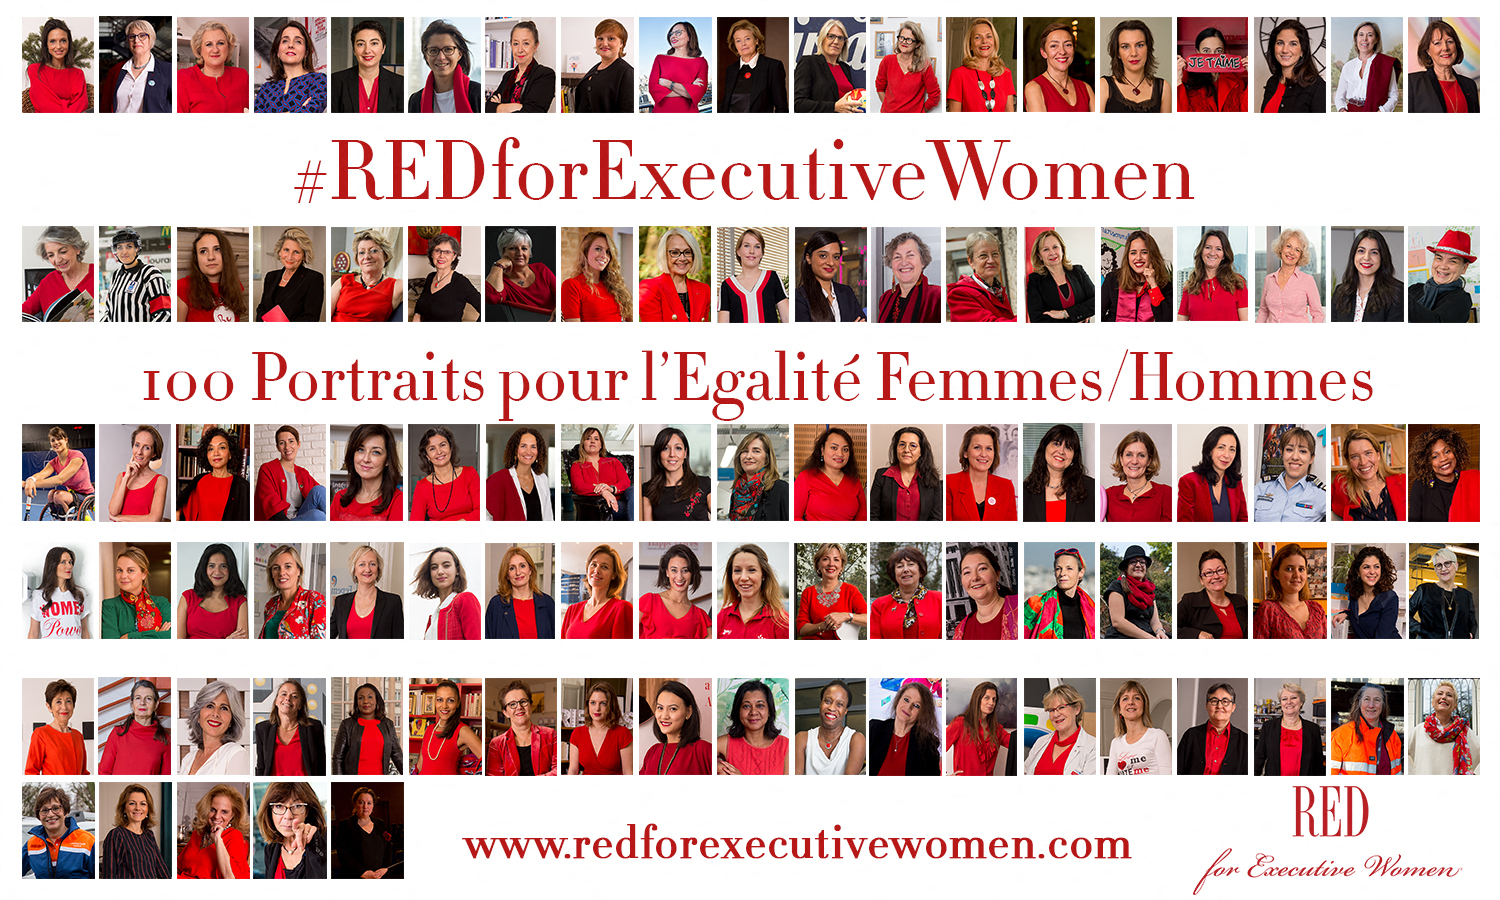 ©Gaël Dupret, France, RED for Executive Women